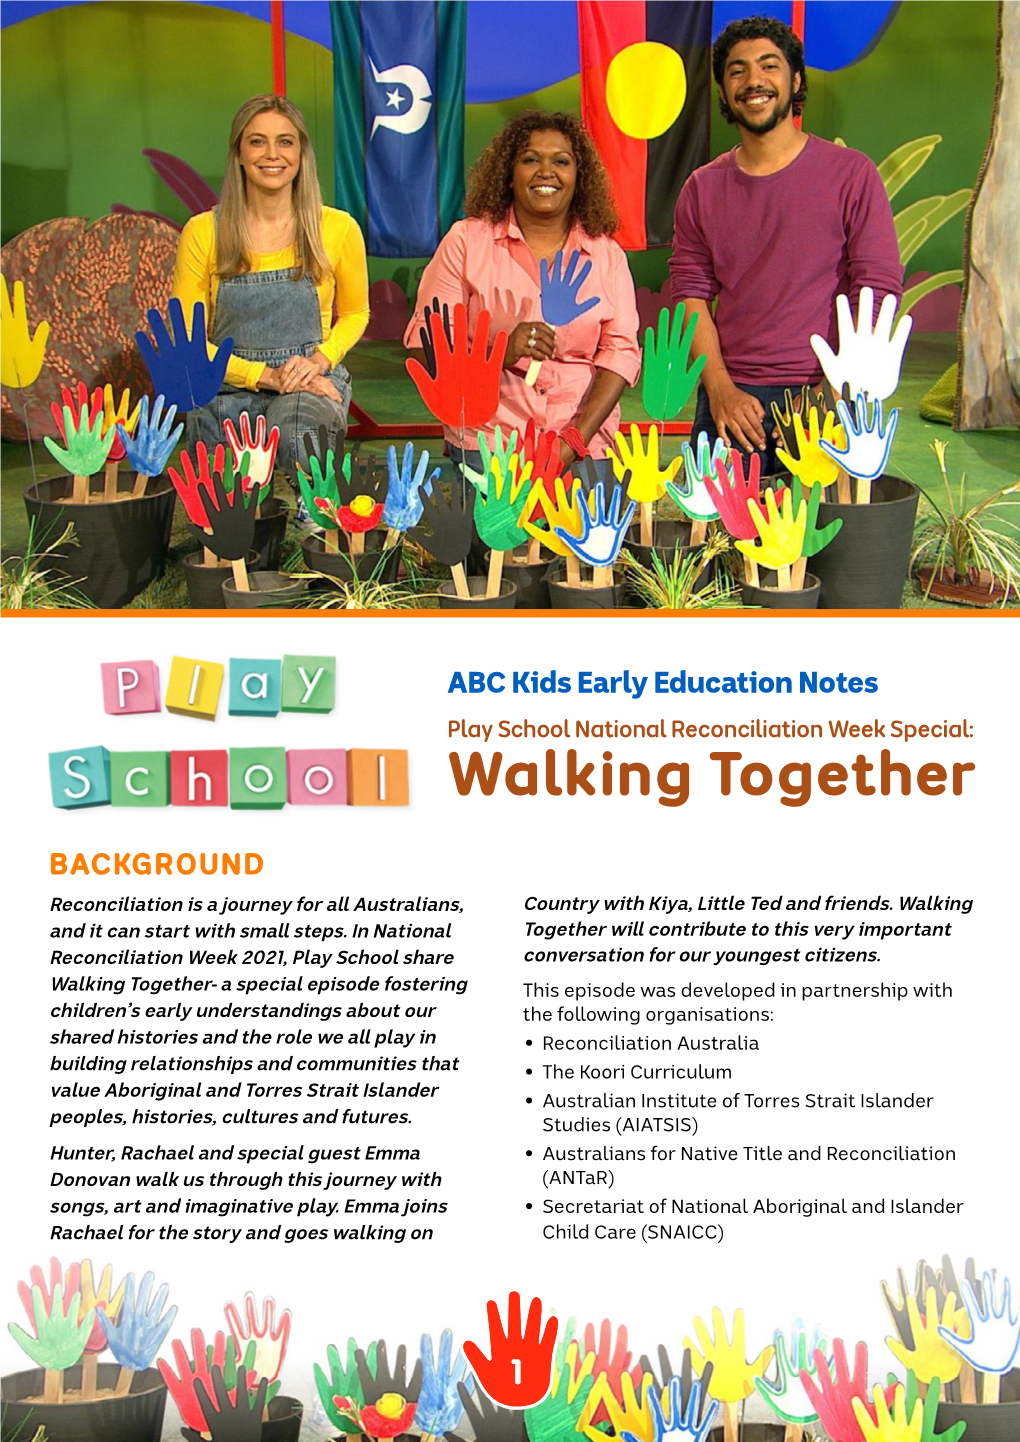 ABC Kids Early Education Notes: Play School Walking Together